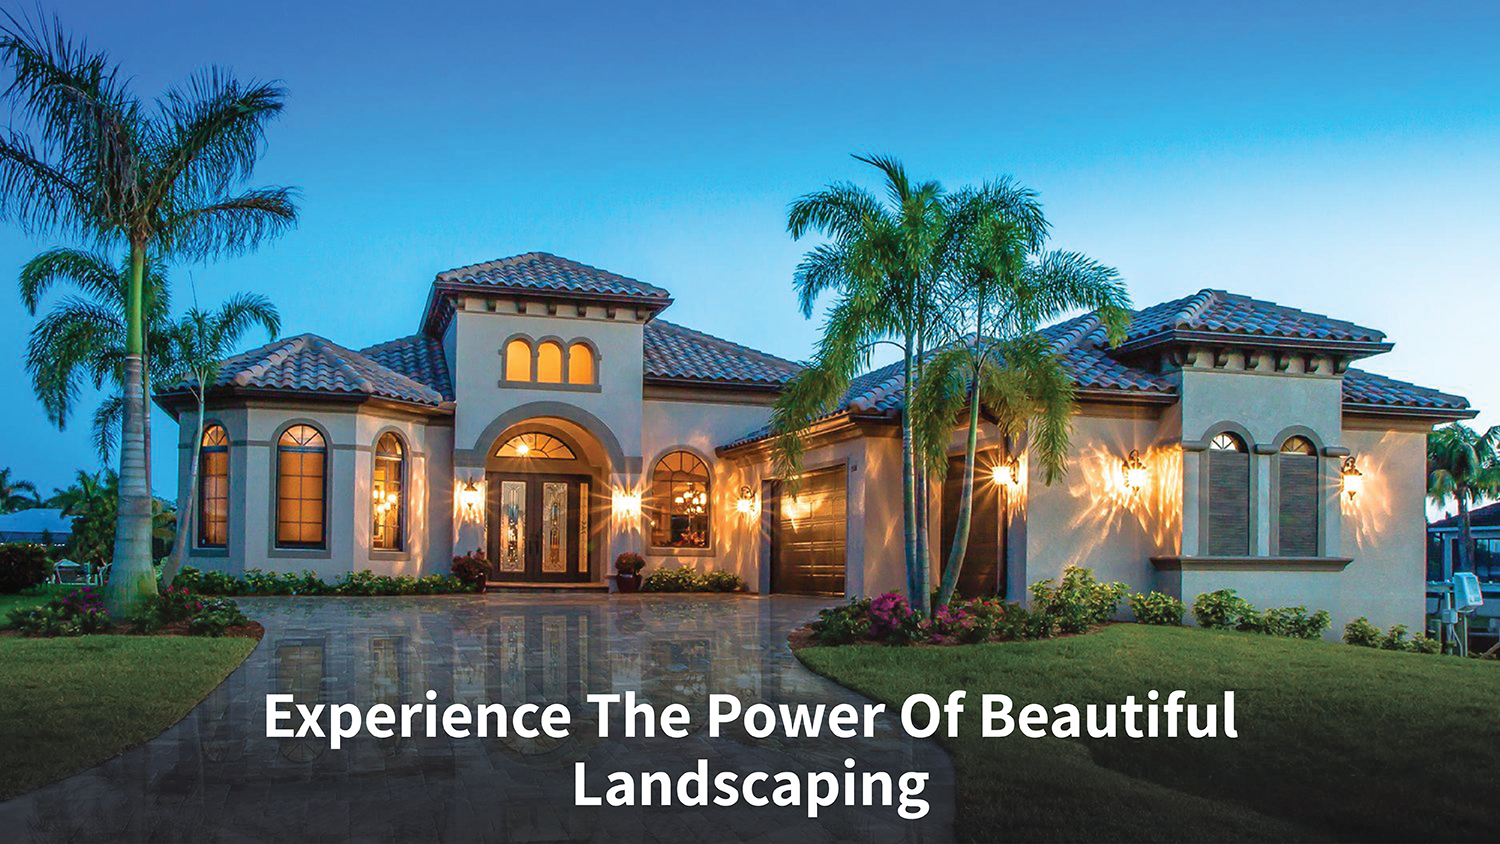 THE POWER OF RESIDENTIAL LANDSCAPING! Transforming your yard.